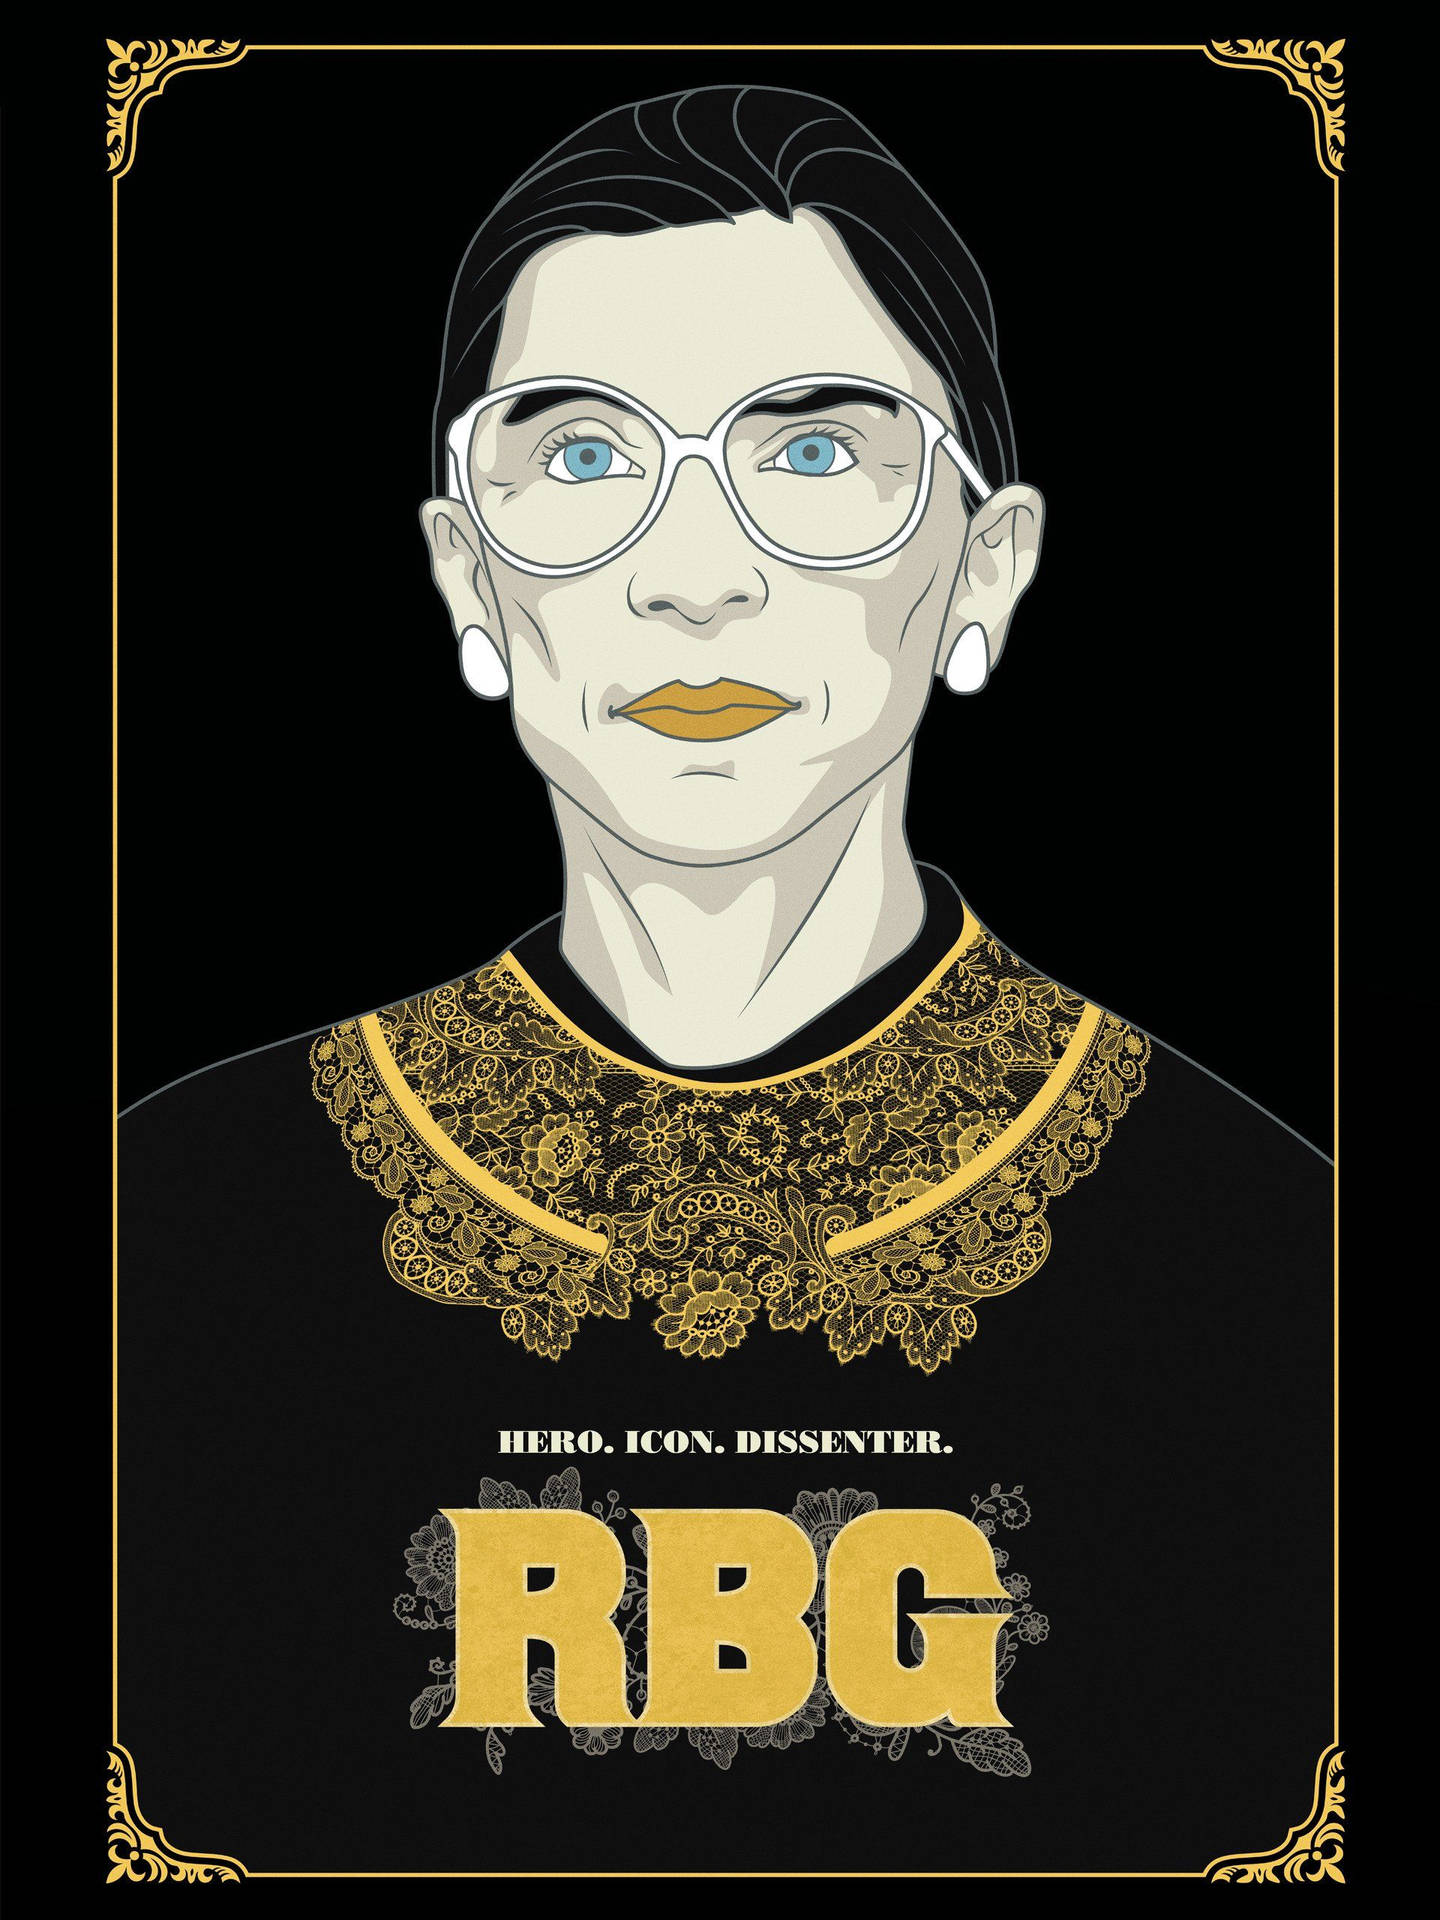 Justice Ruth Bader Ginsburg's Vector Art Portrait Background